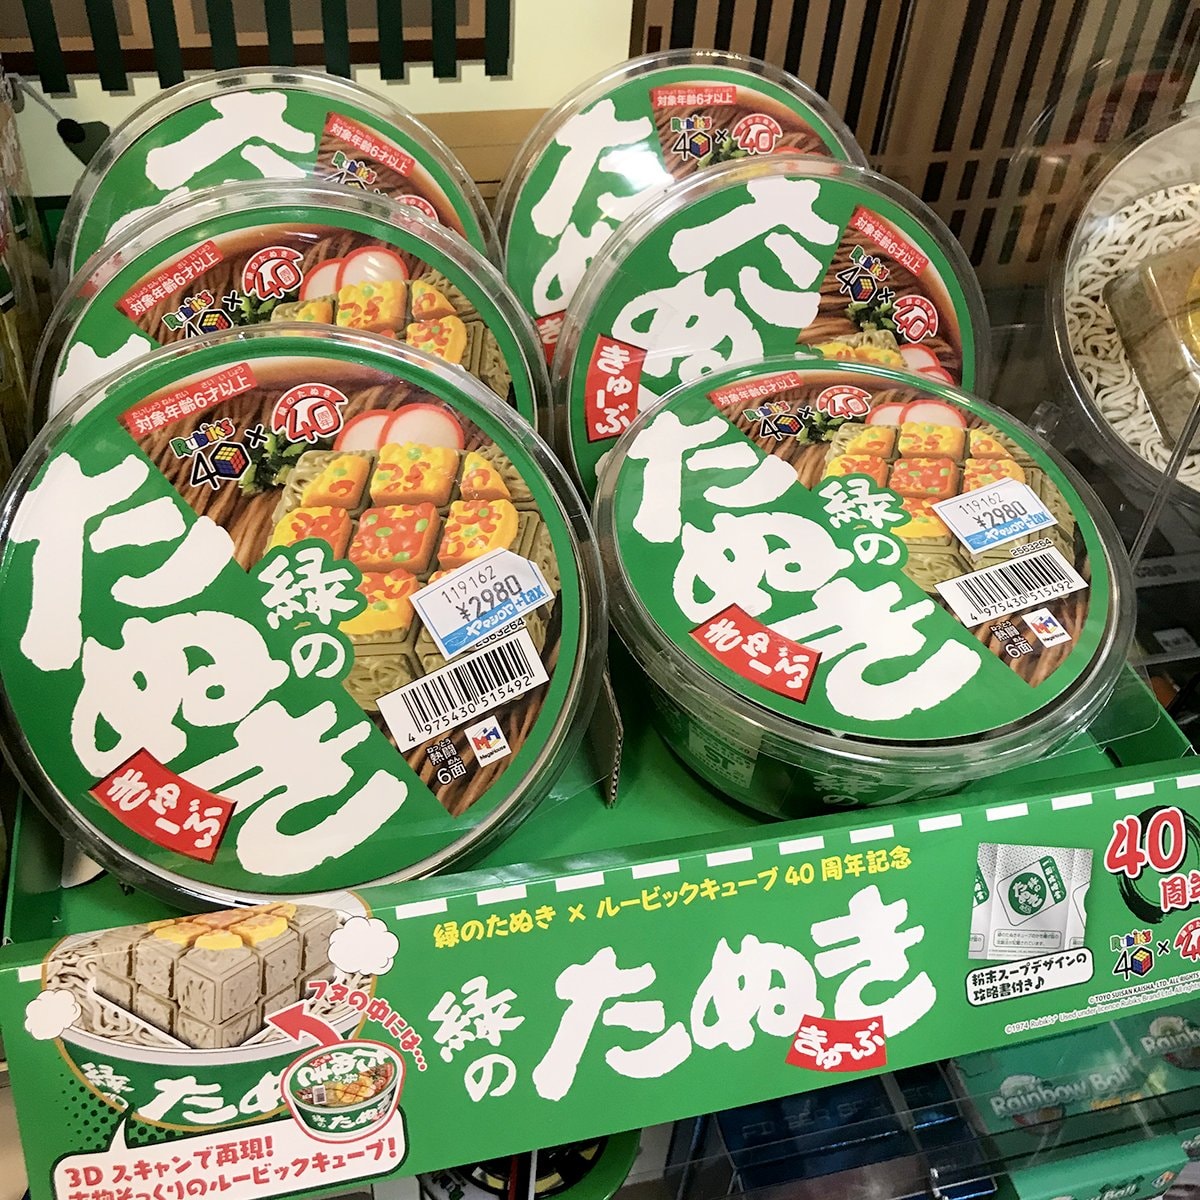 cup noodle rubik's cube - green tanuki cube packaging